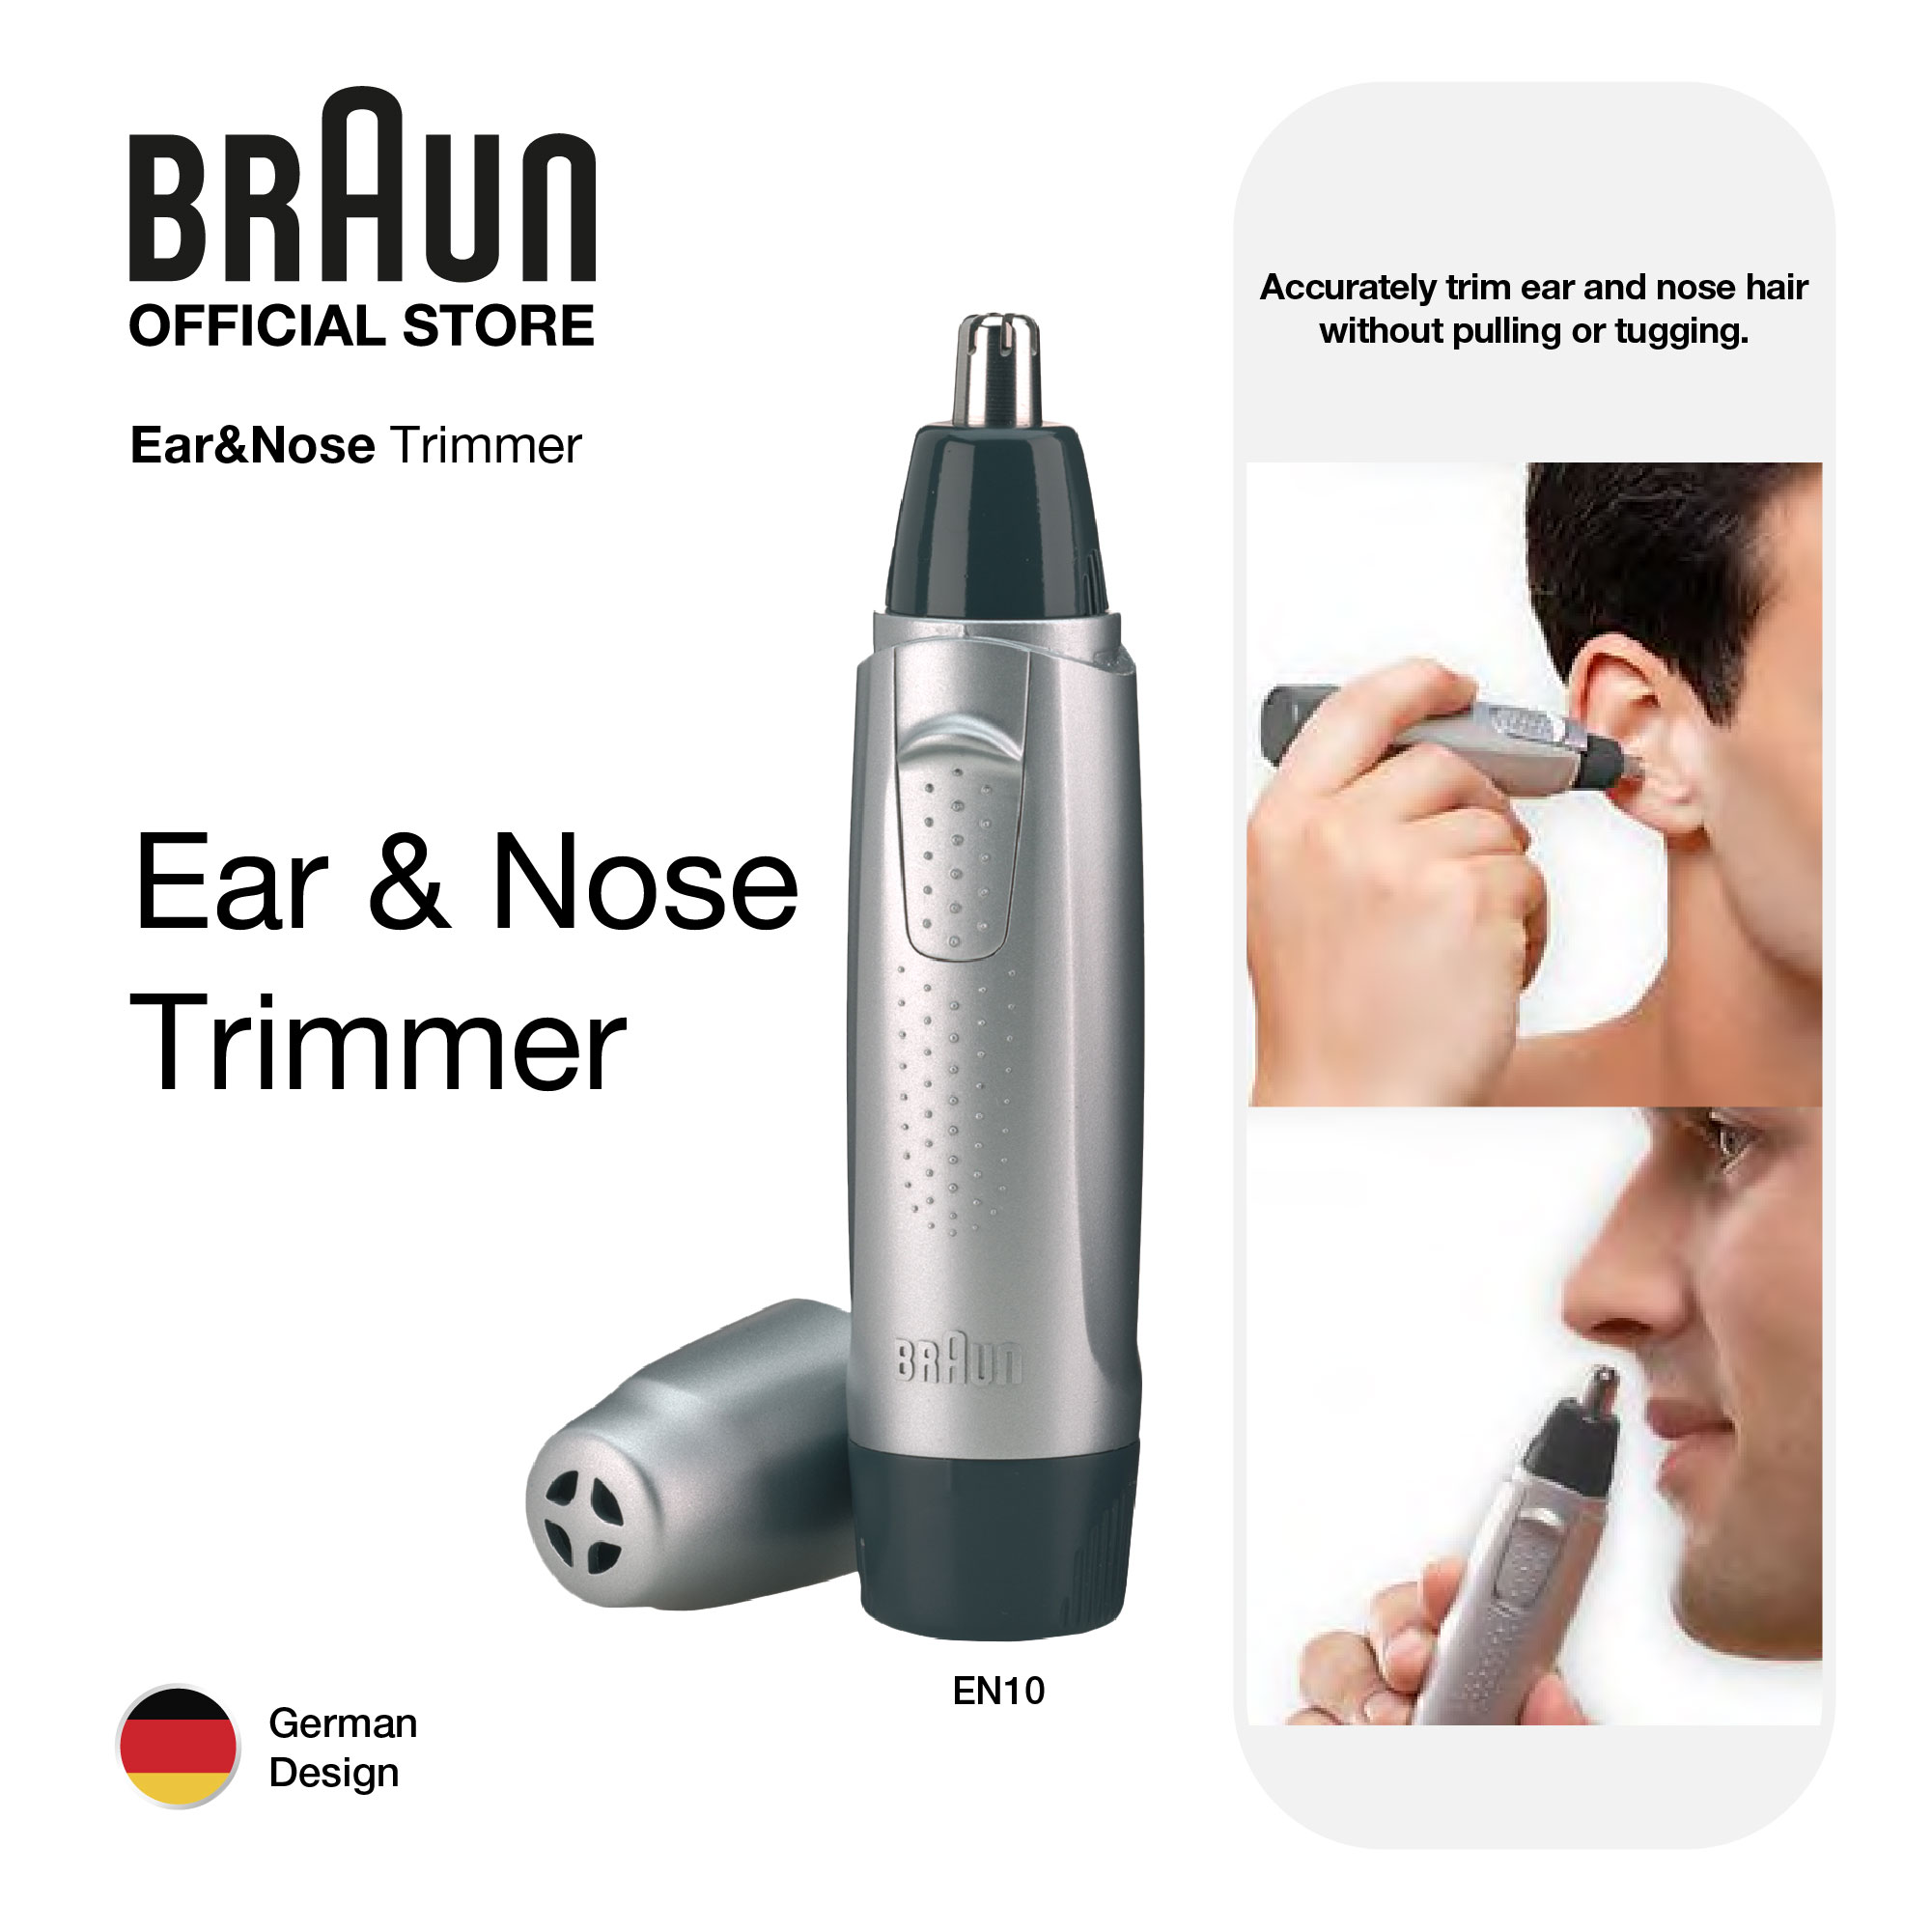 Braun Ear & Nose Trimmer EN10 - Silver/Black - Nose Hair Trimmer for Men -  Efficient and safe ear and nose hair removal with accurate trim | Lazada PH